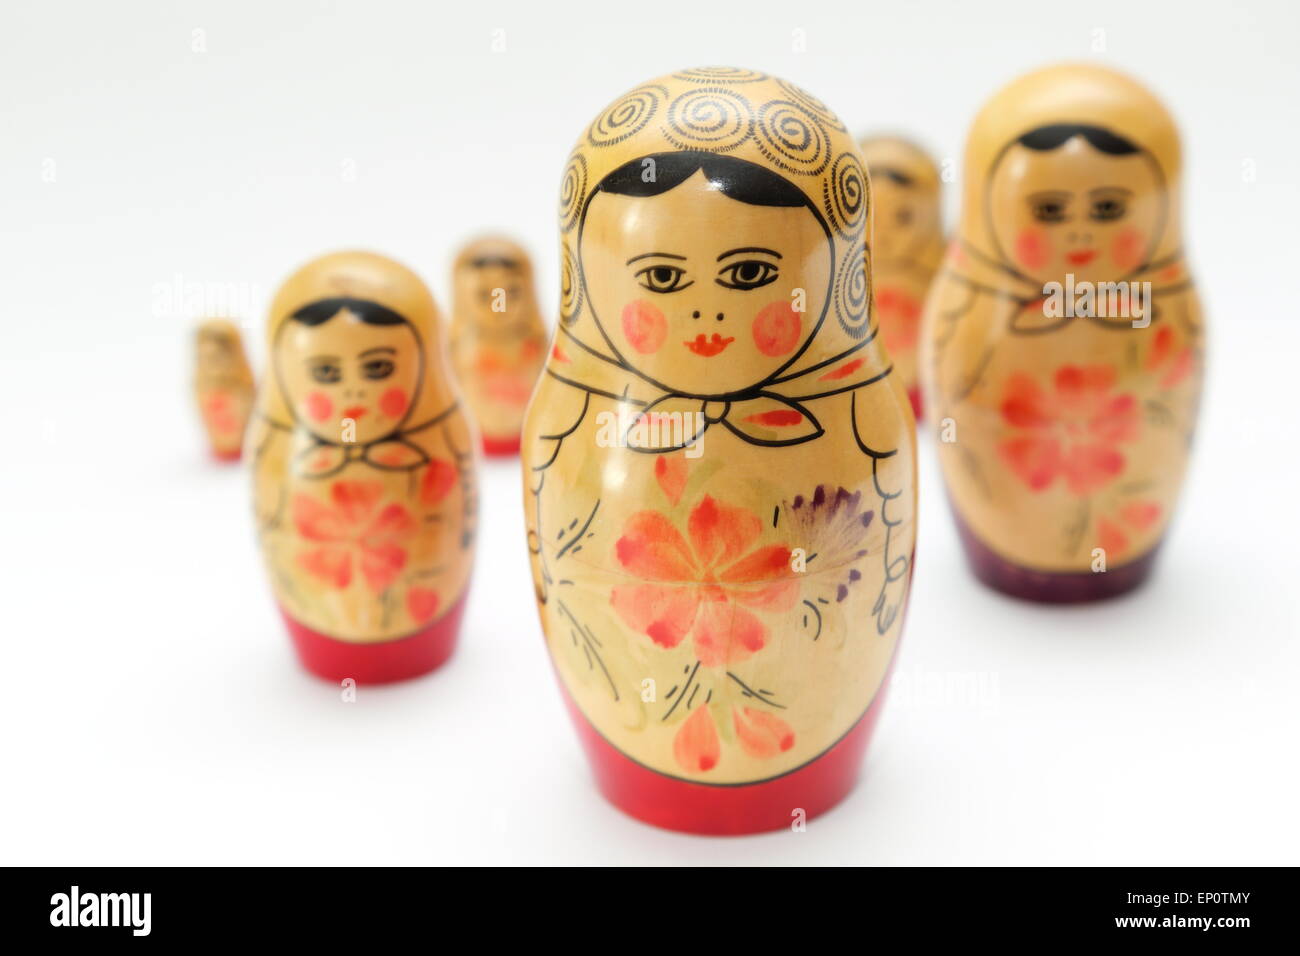 Russian doll, refers to a set of wooden dolls of decreasing size placed one inside the other. Stock Photo